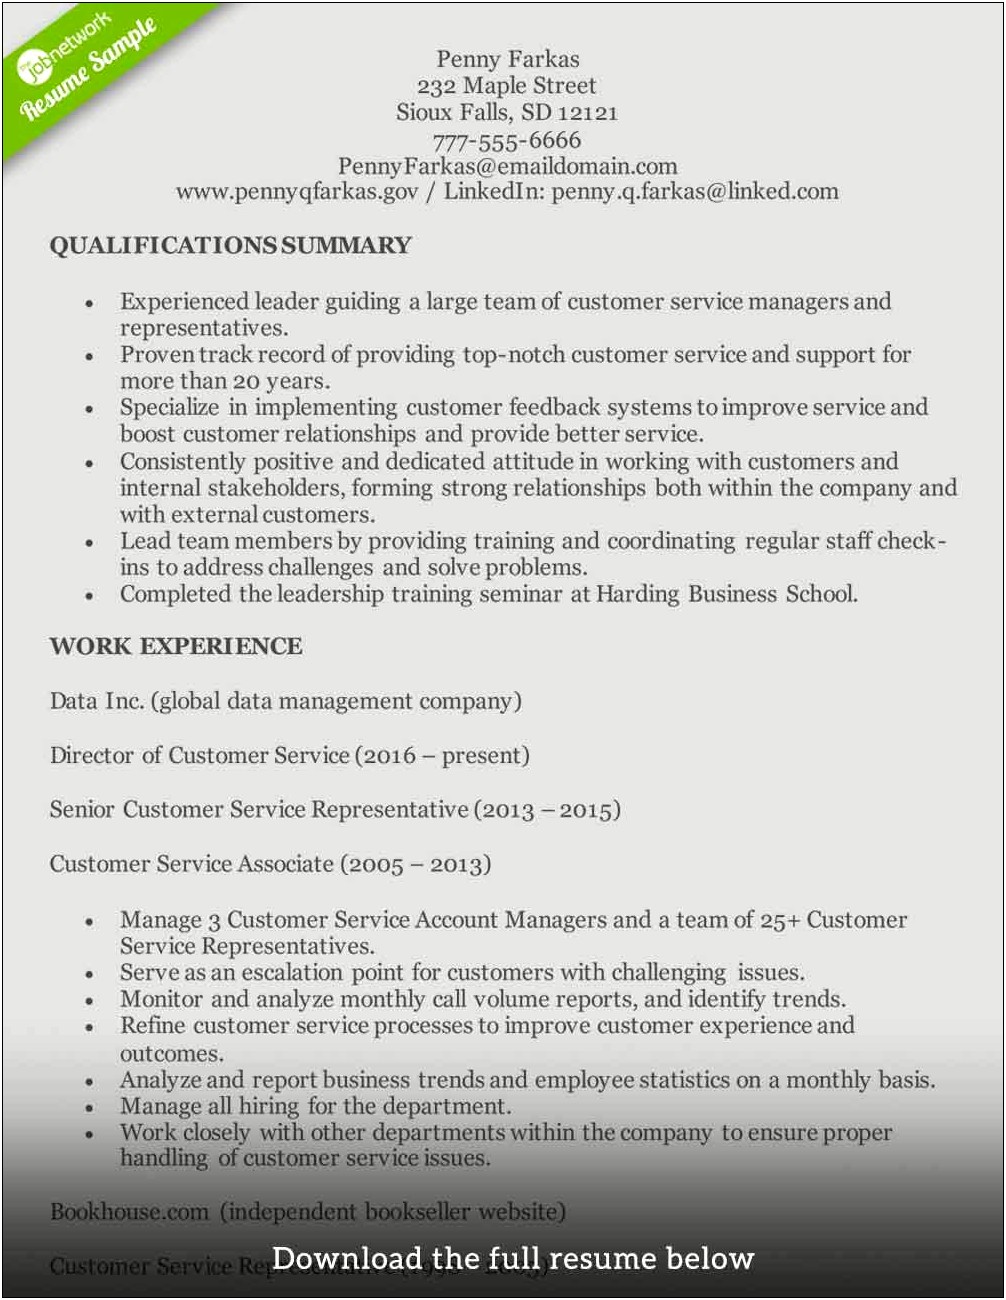 Work At Home Customer Service Professional Profile Resume